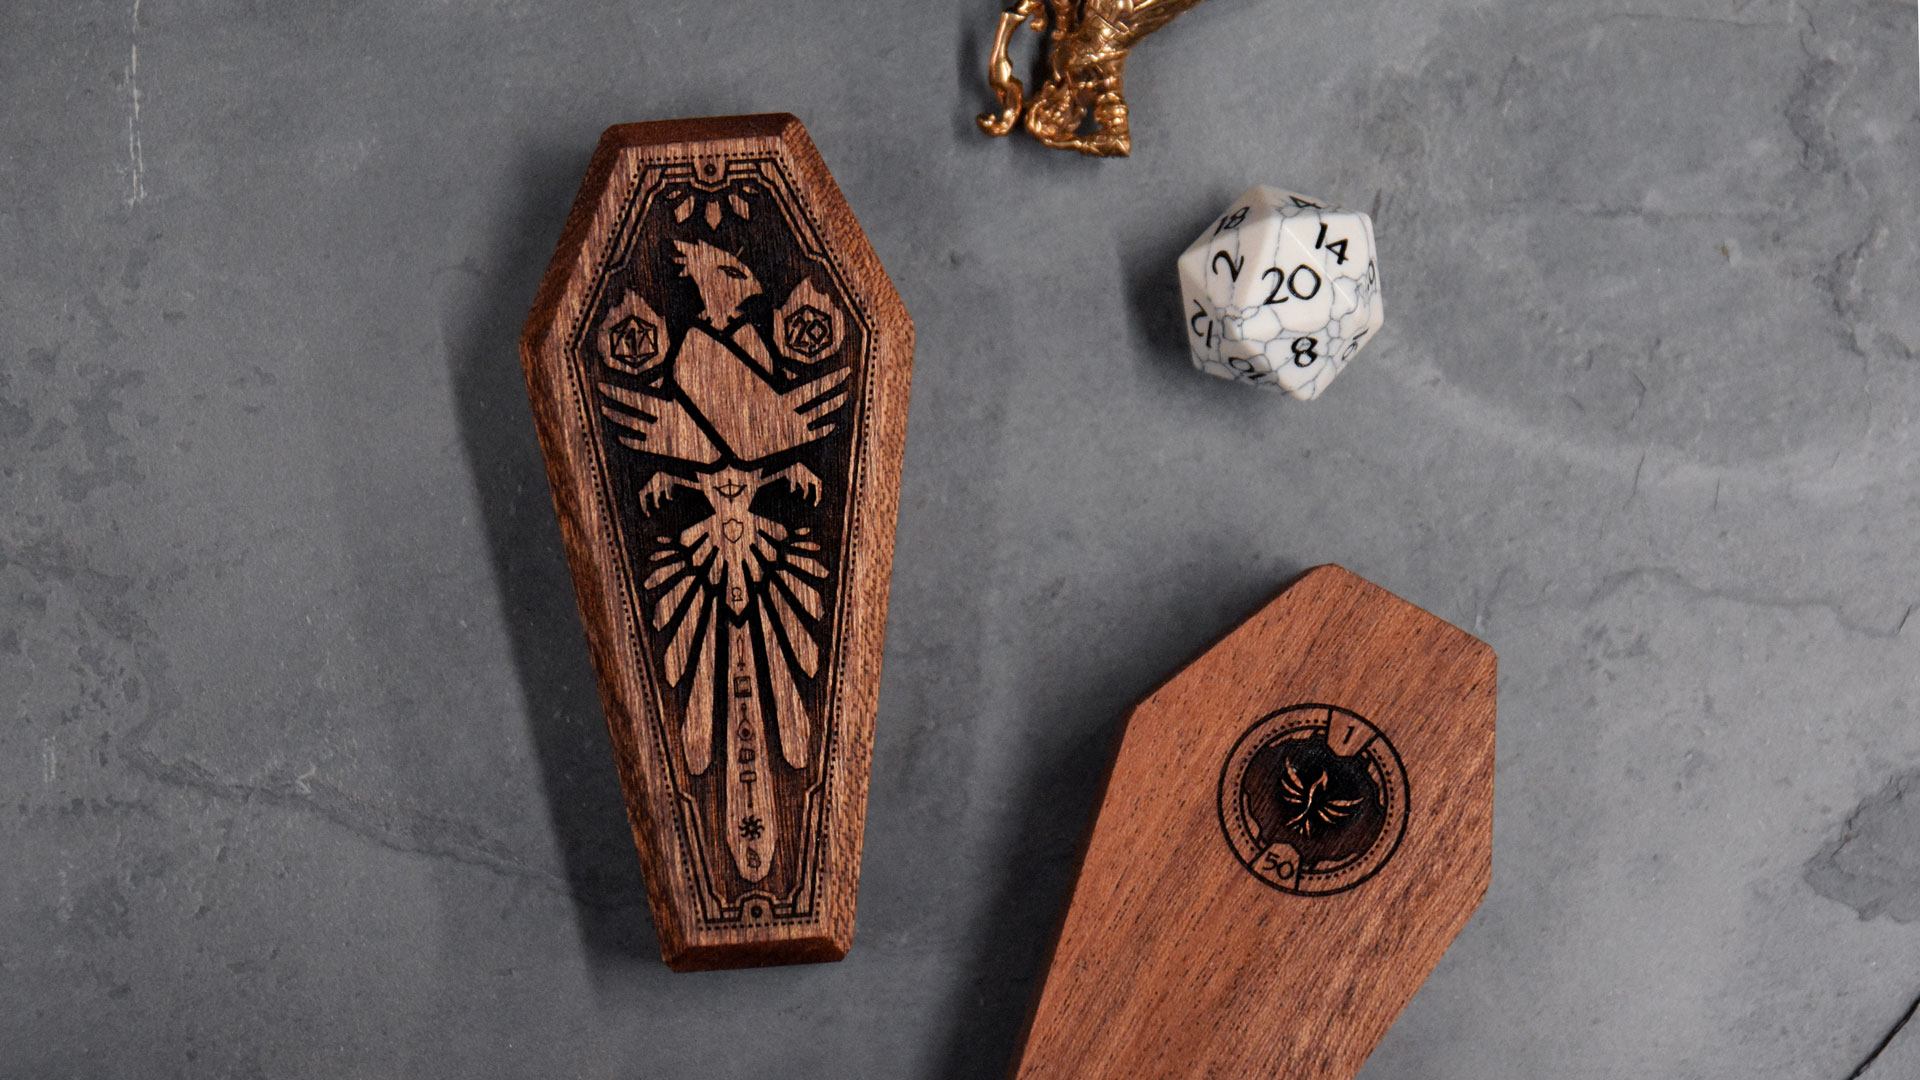 2 closed Mini Dice Sarcophagi, showing top and bottom engraving, next to D20 and miniature figurine